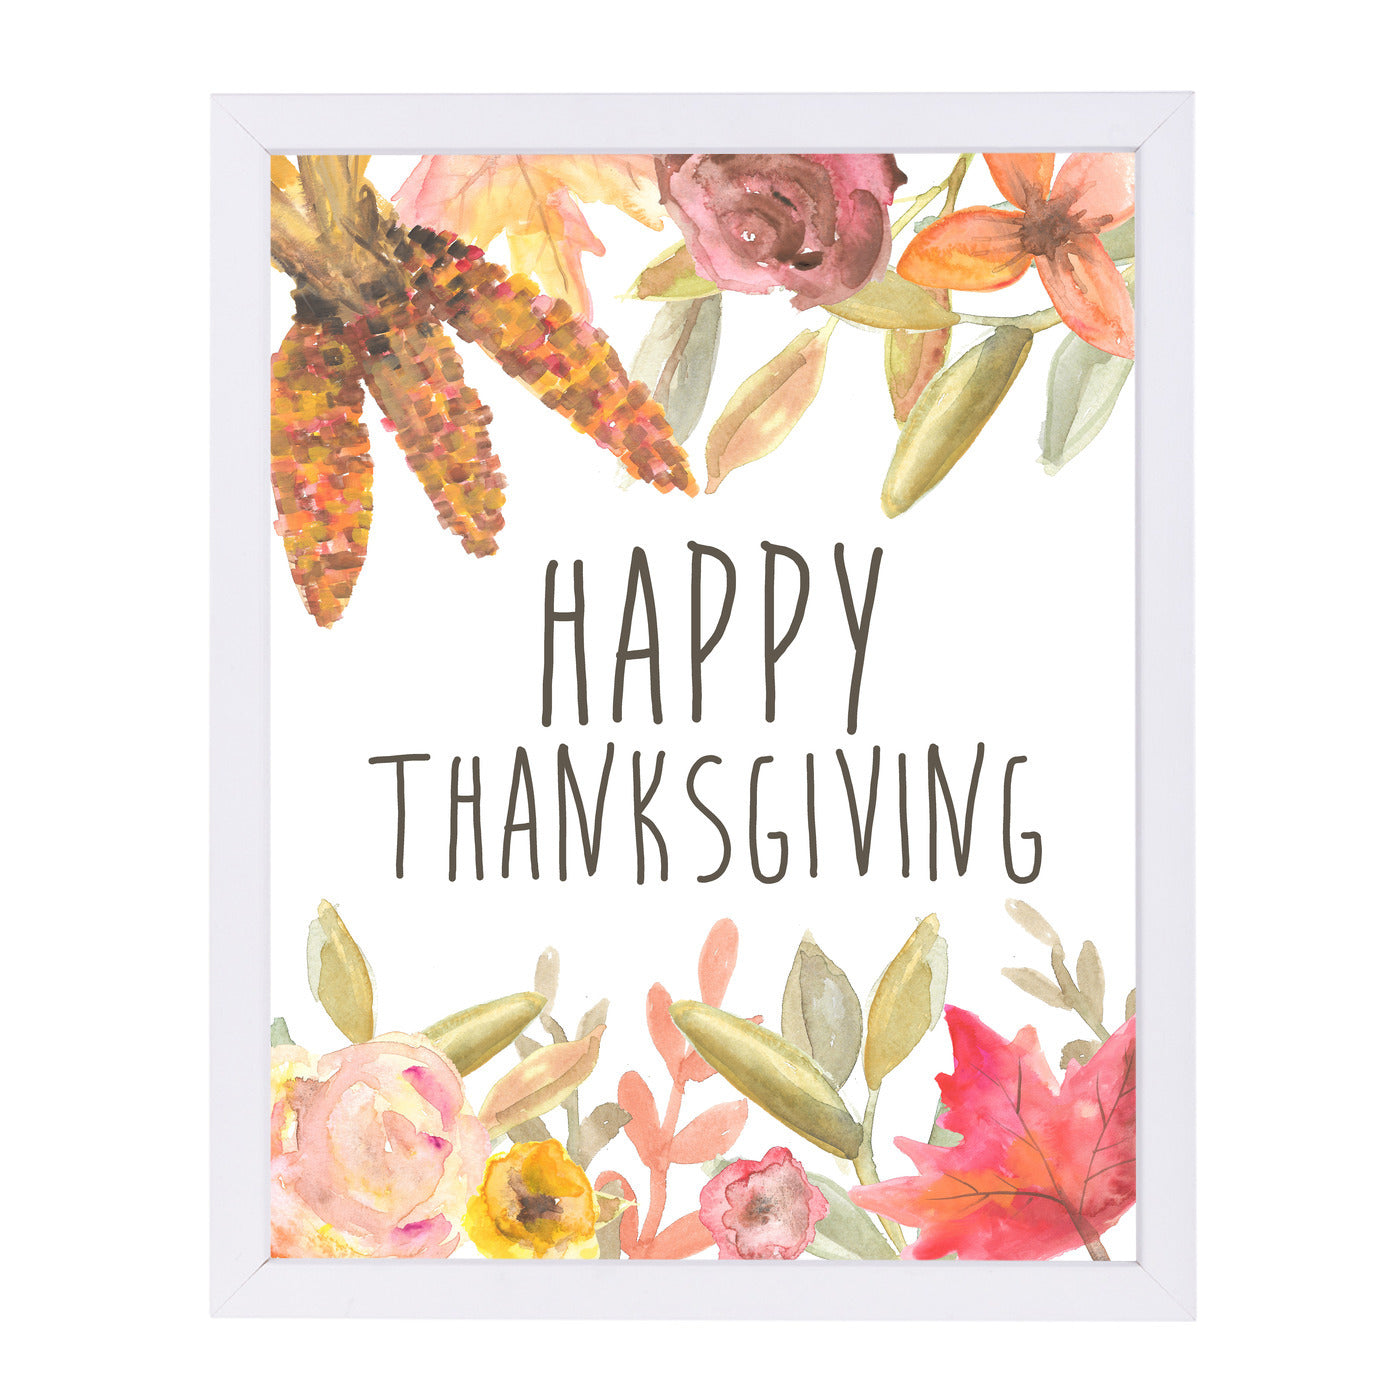 Happy Thanksgiving Festive by Jetty Printables Framed Print - Americanflat